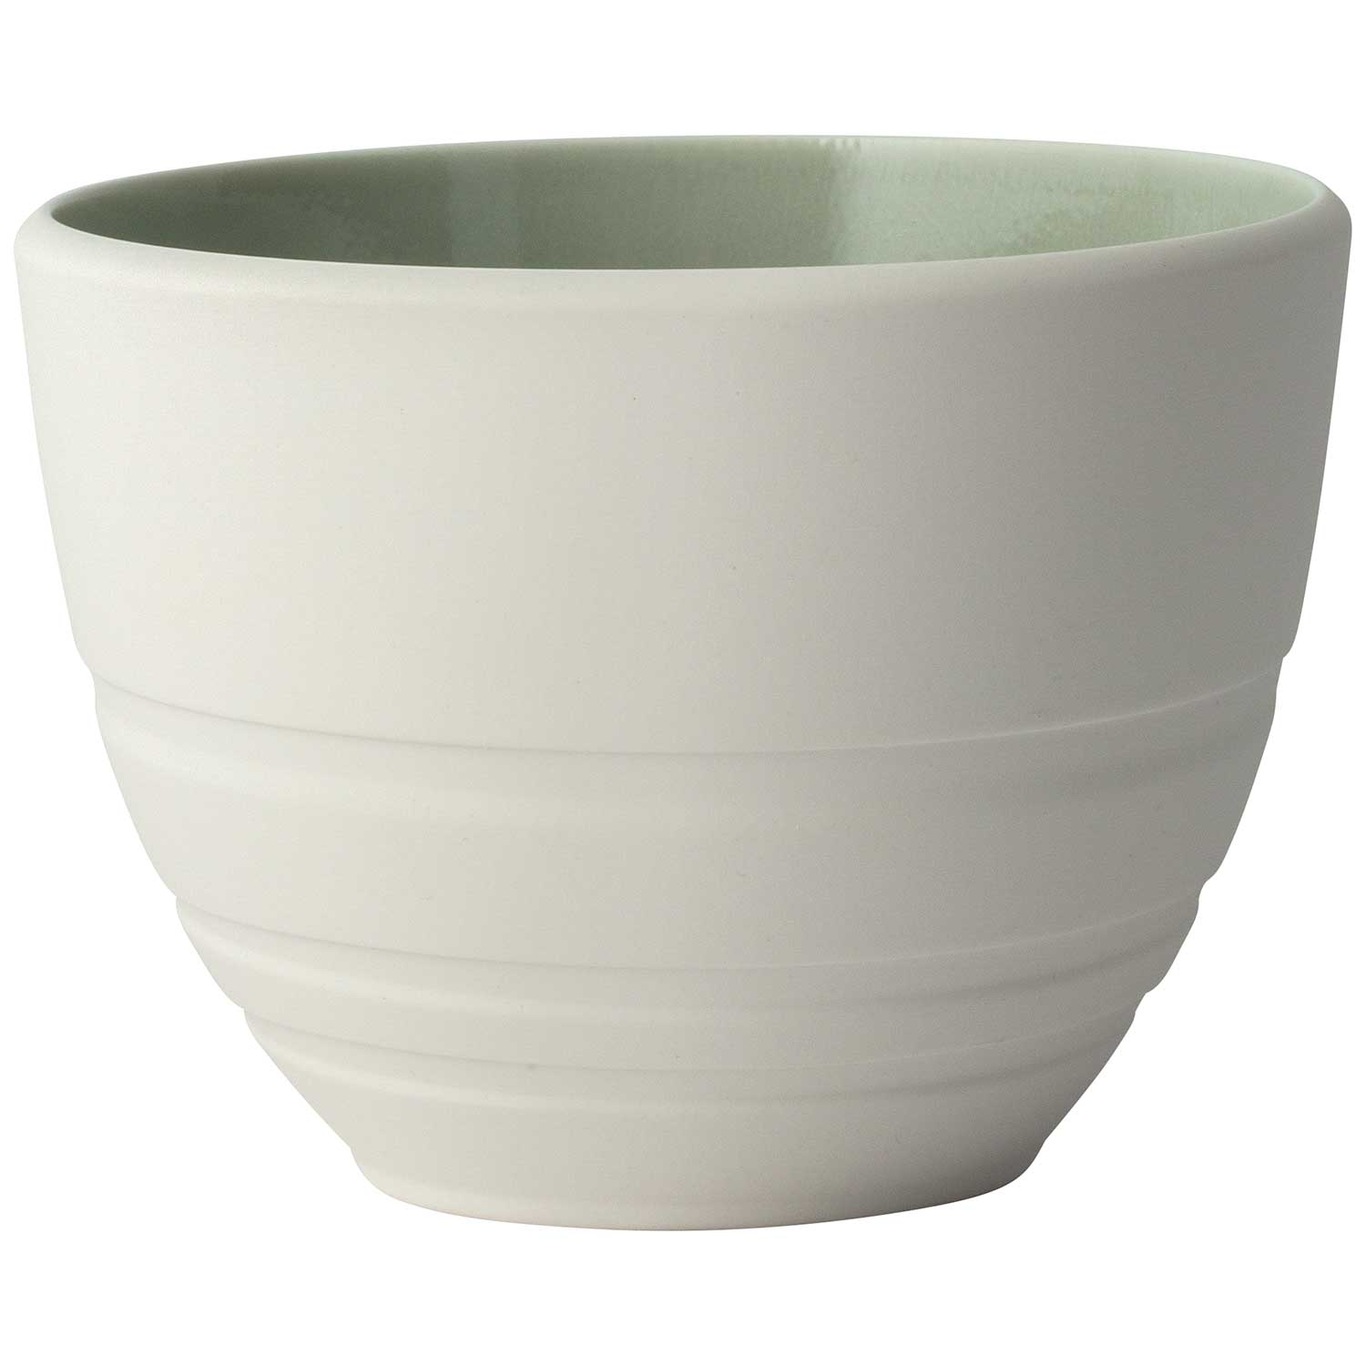 It's My Match Mugg Leaf 45 cl, White/Mineral Green